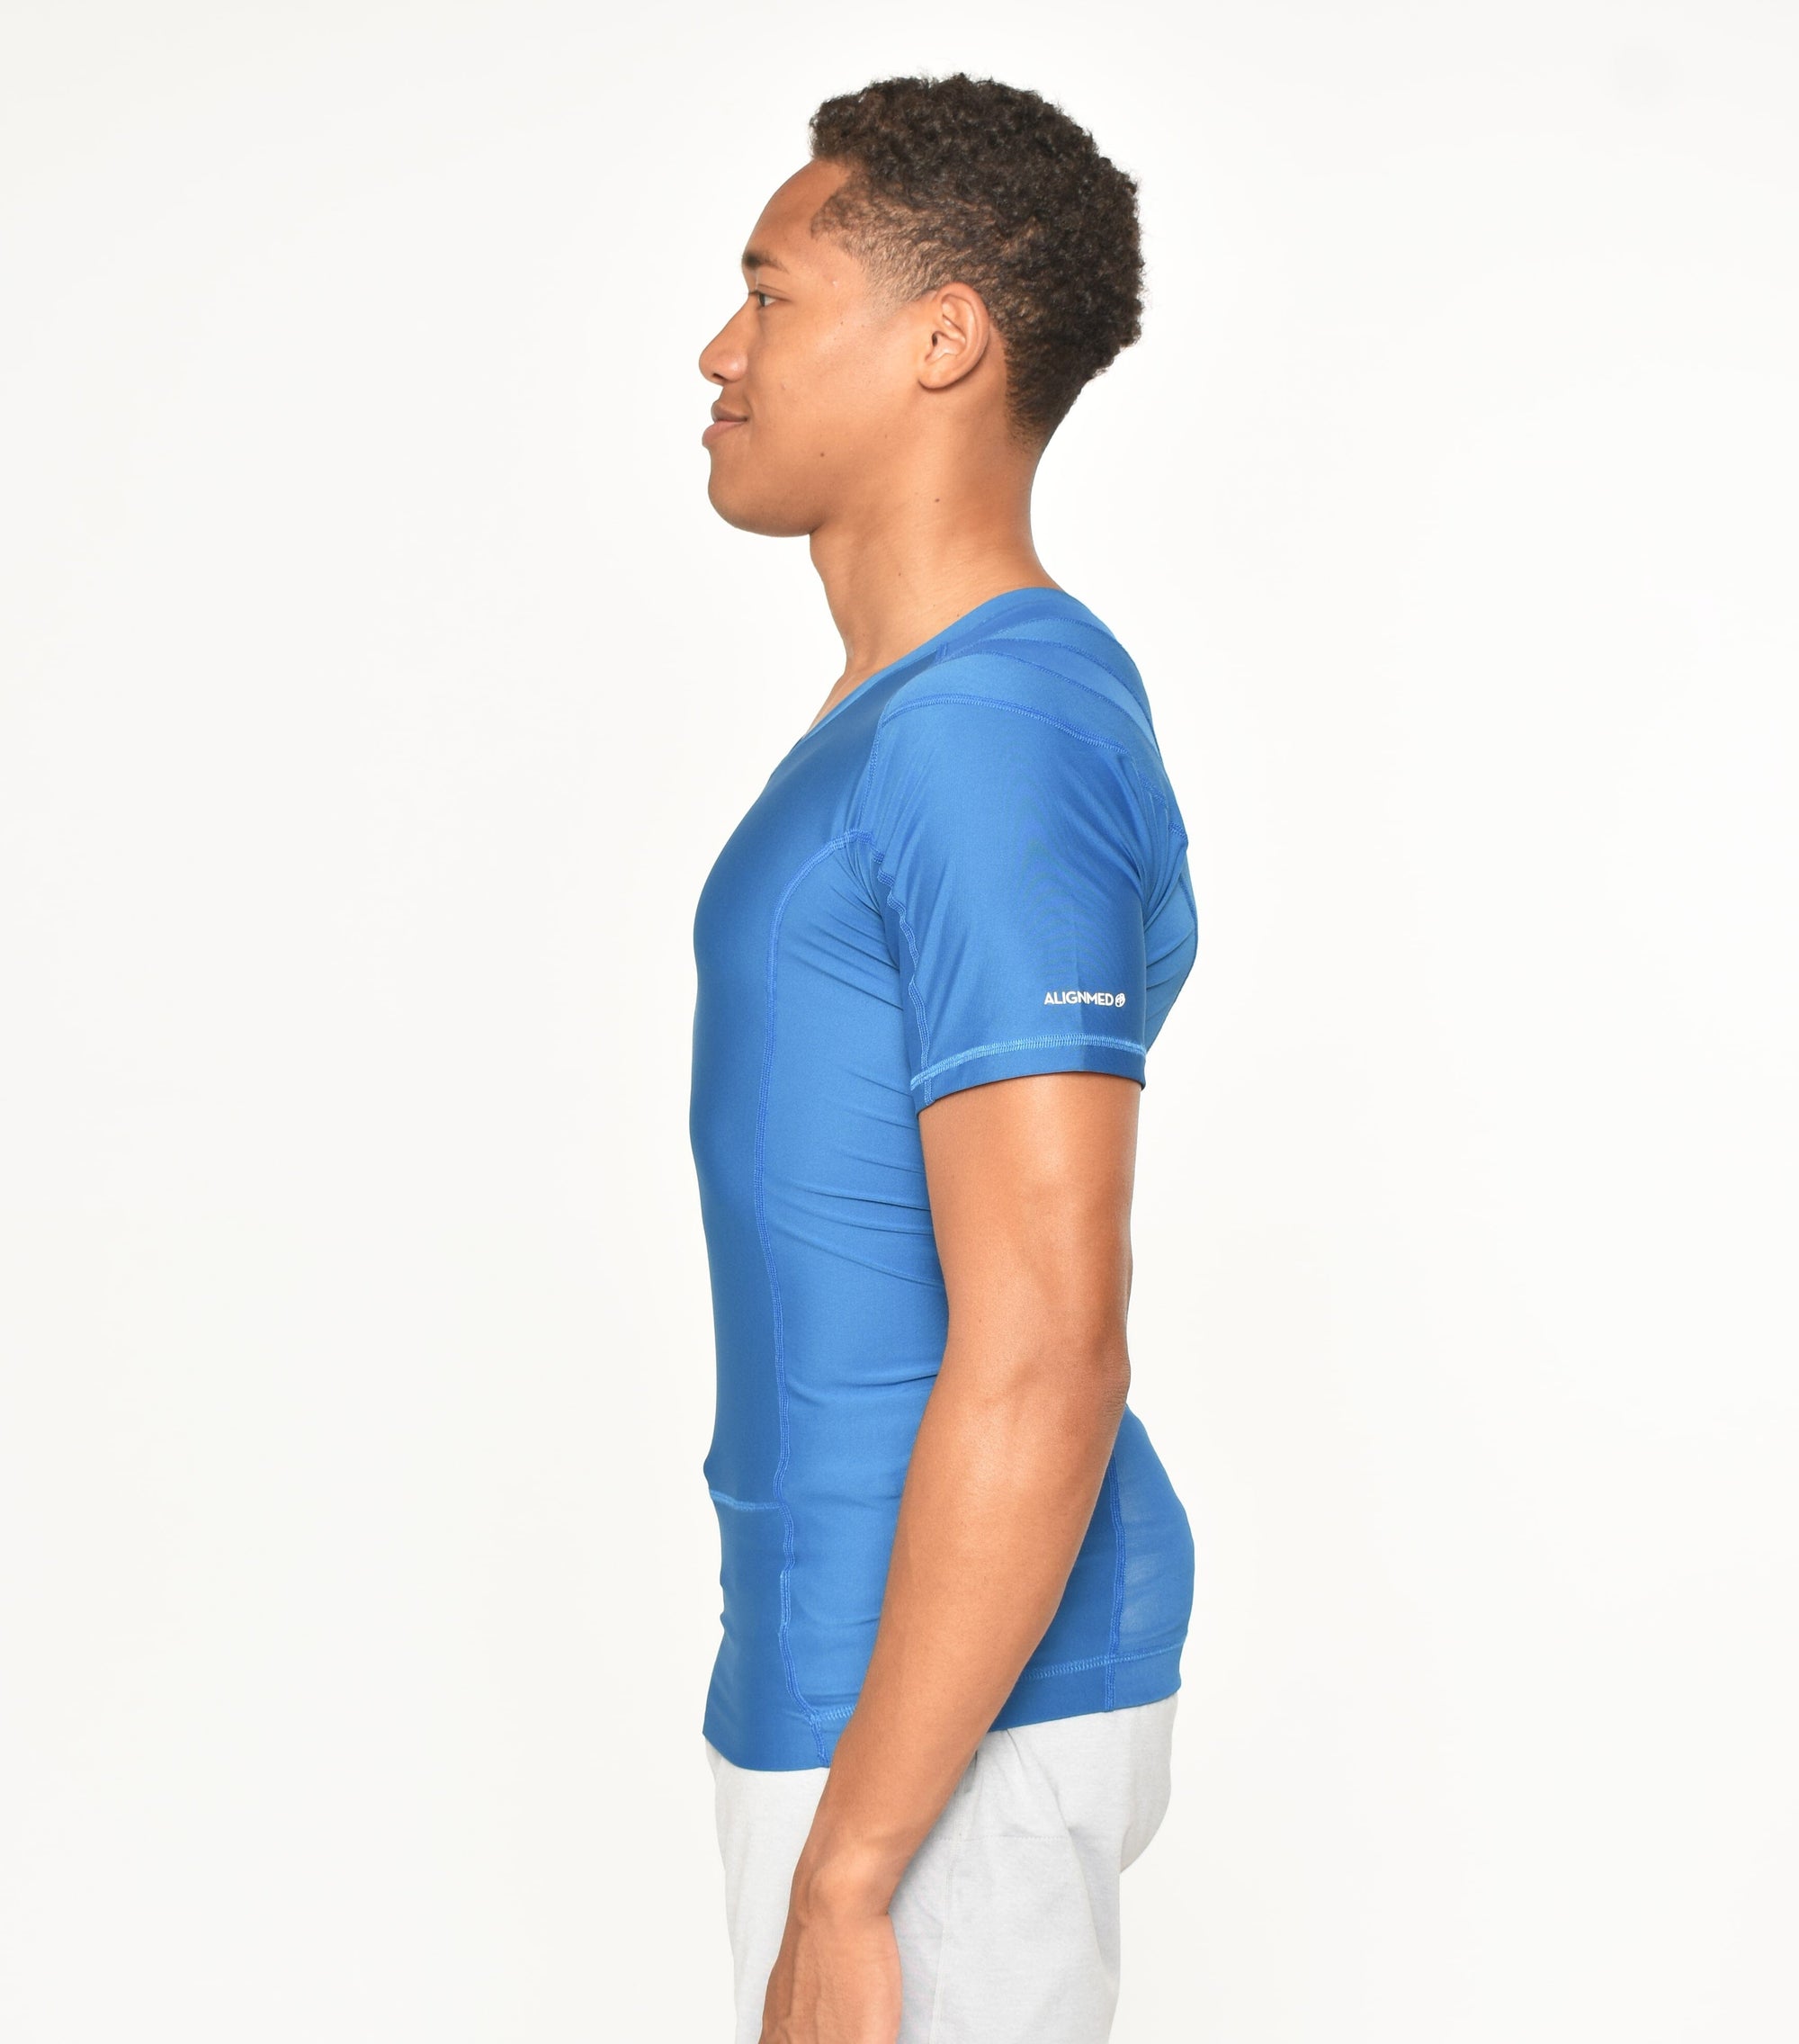 Posture Corrector on Instagram: An innovative patented design inspired to  positively impact the world 🌎, the Posture Shirt® is comfortable for you  to wear for any occasion. alignmed.com . . . #backpain #